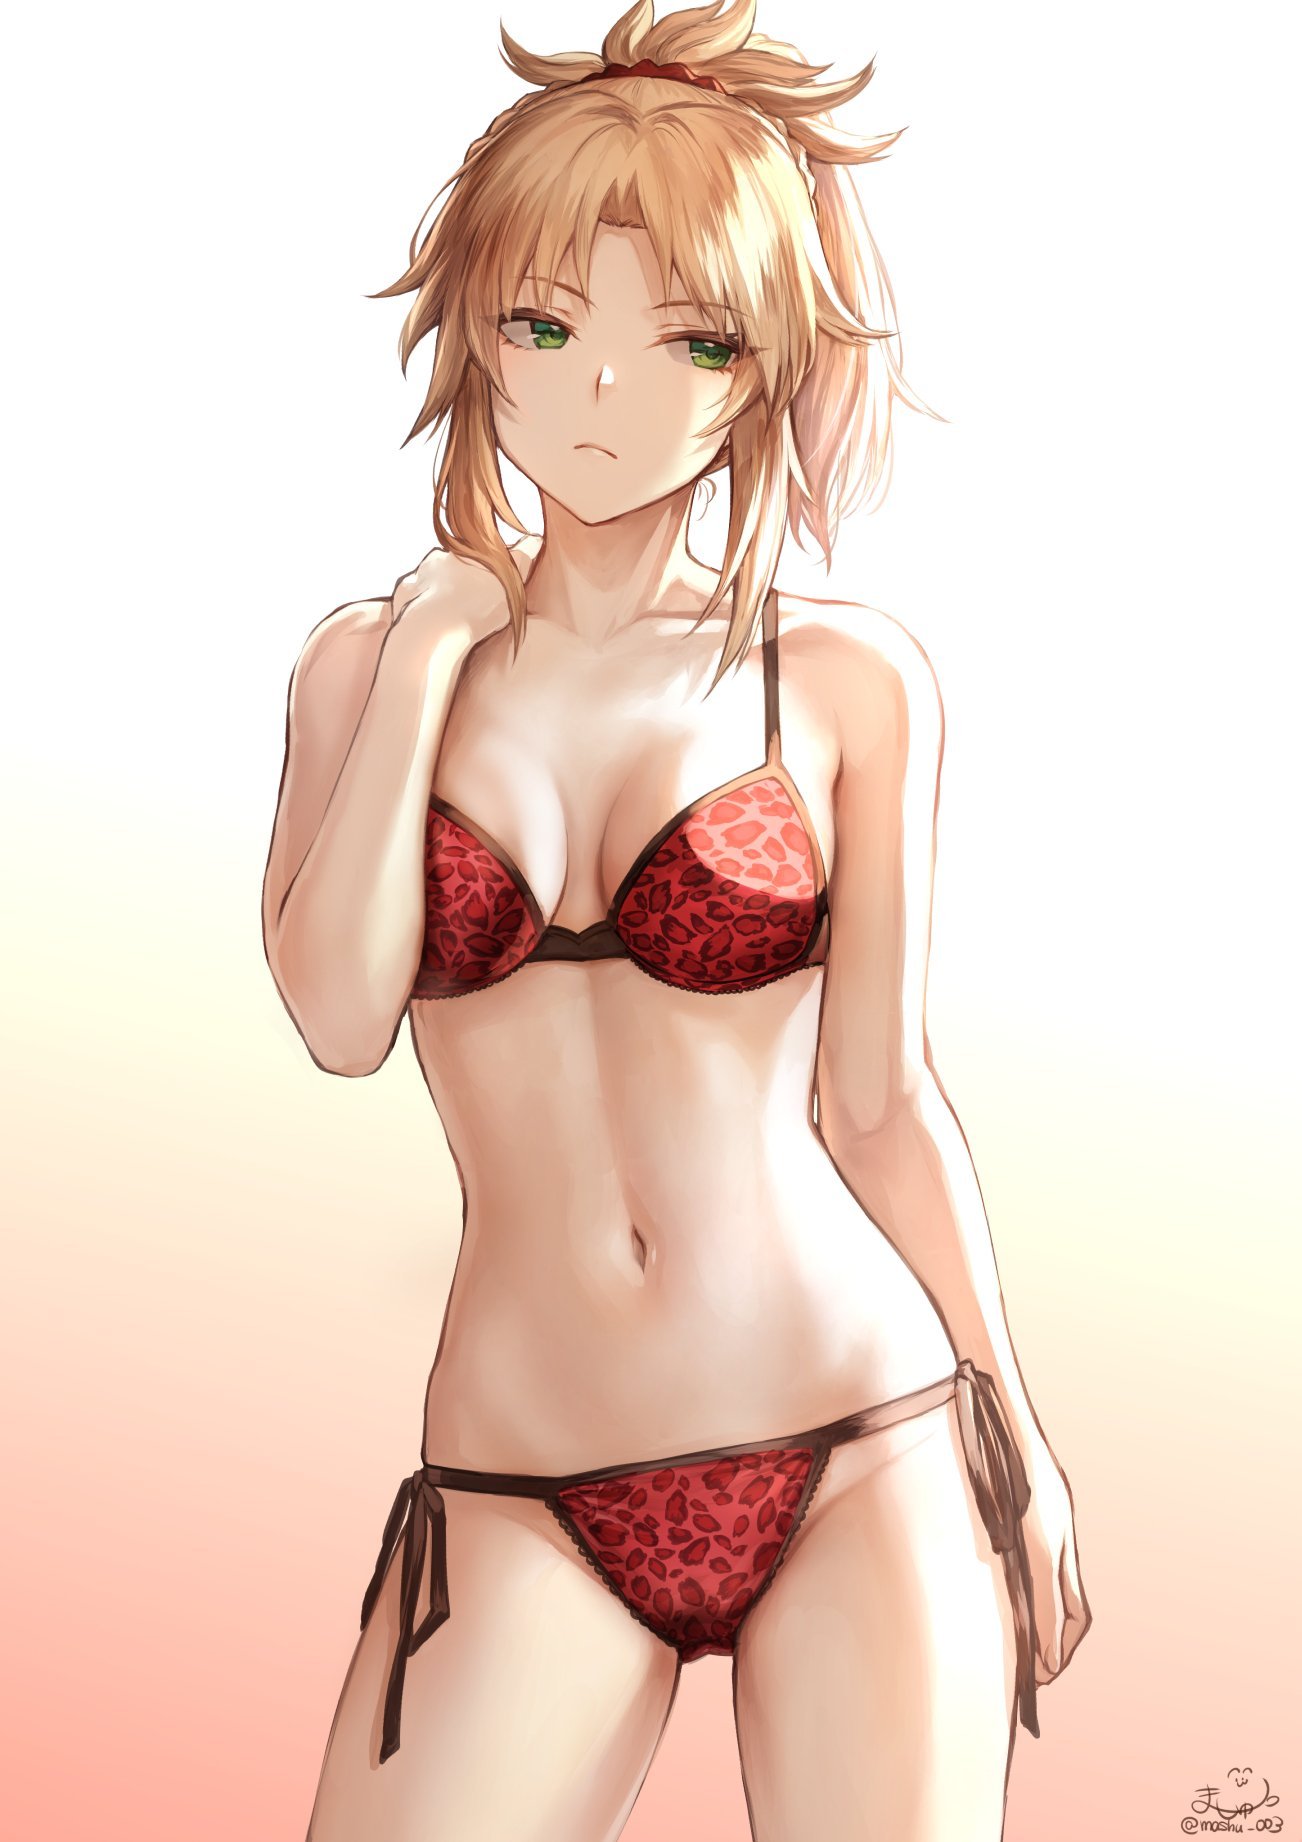 Red lingerie [Fate]